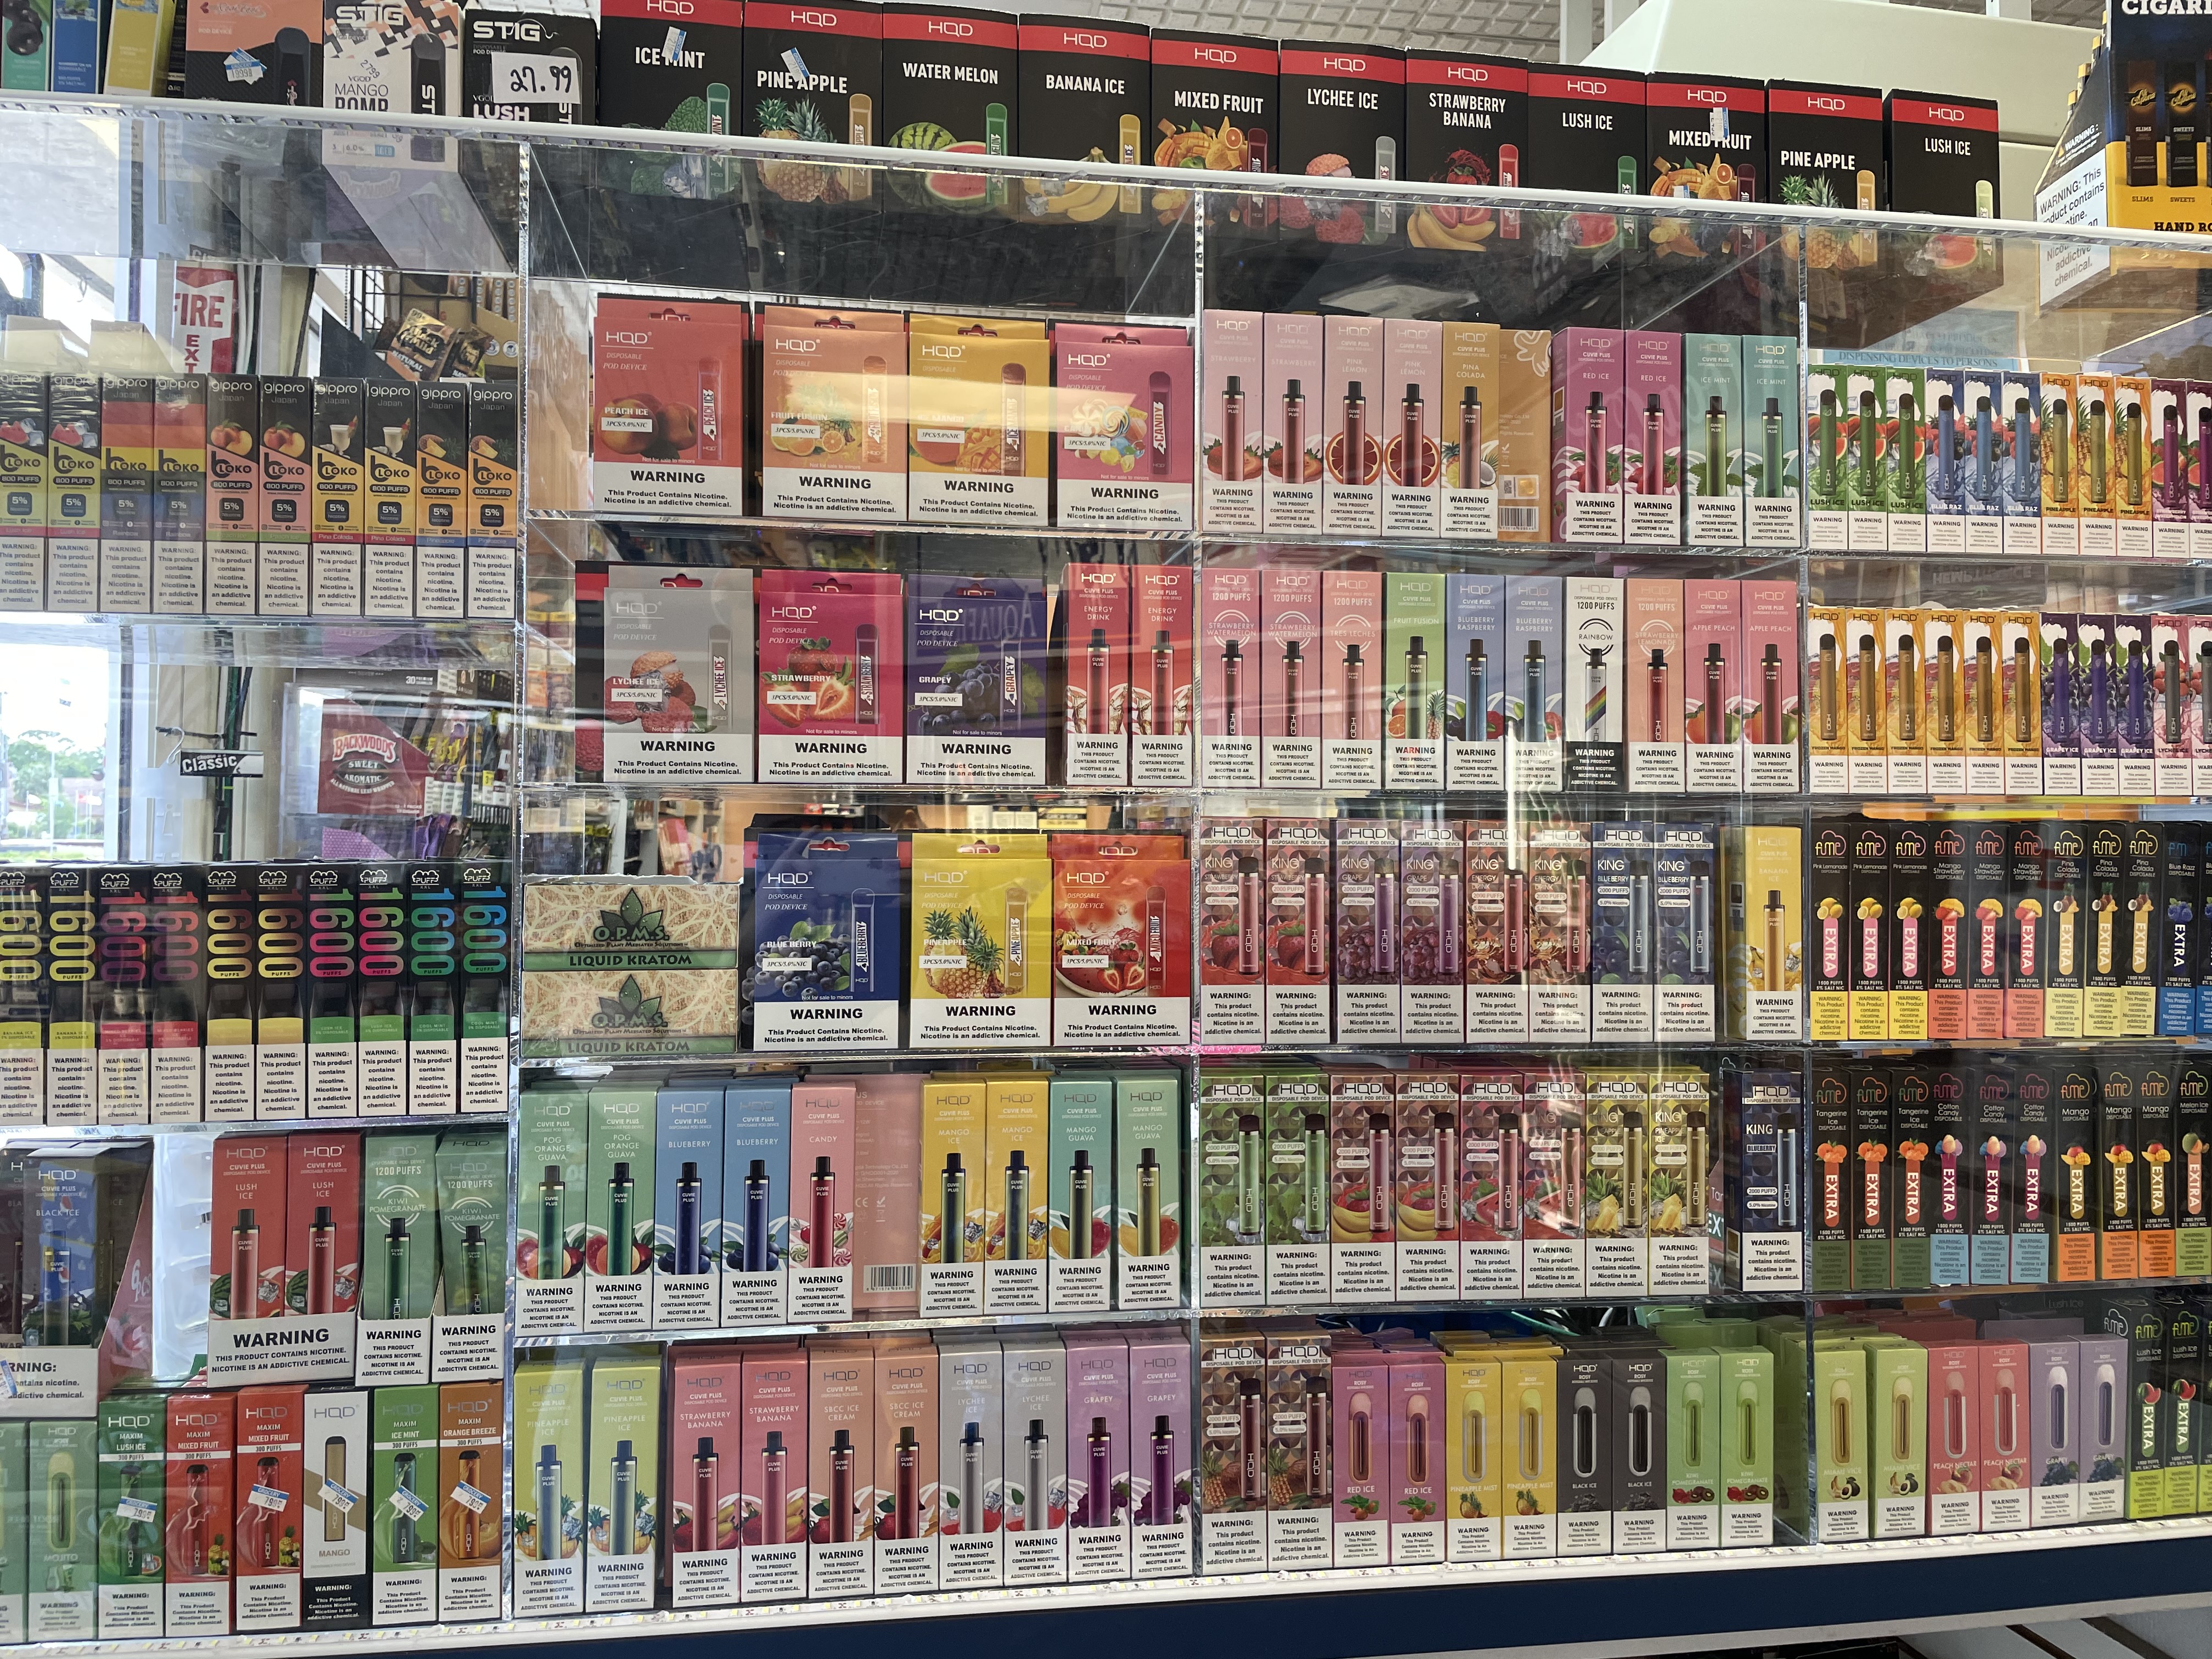 wall size display of flavored e-cigarettes 